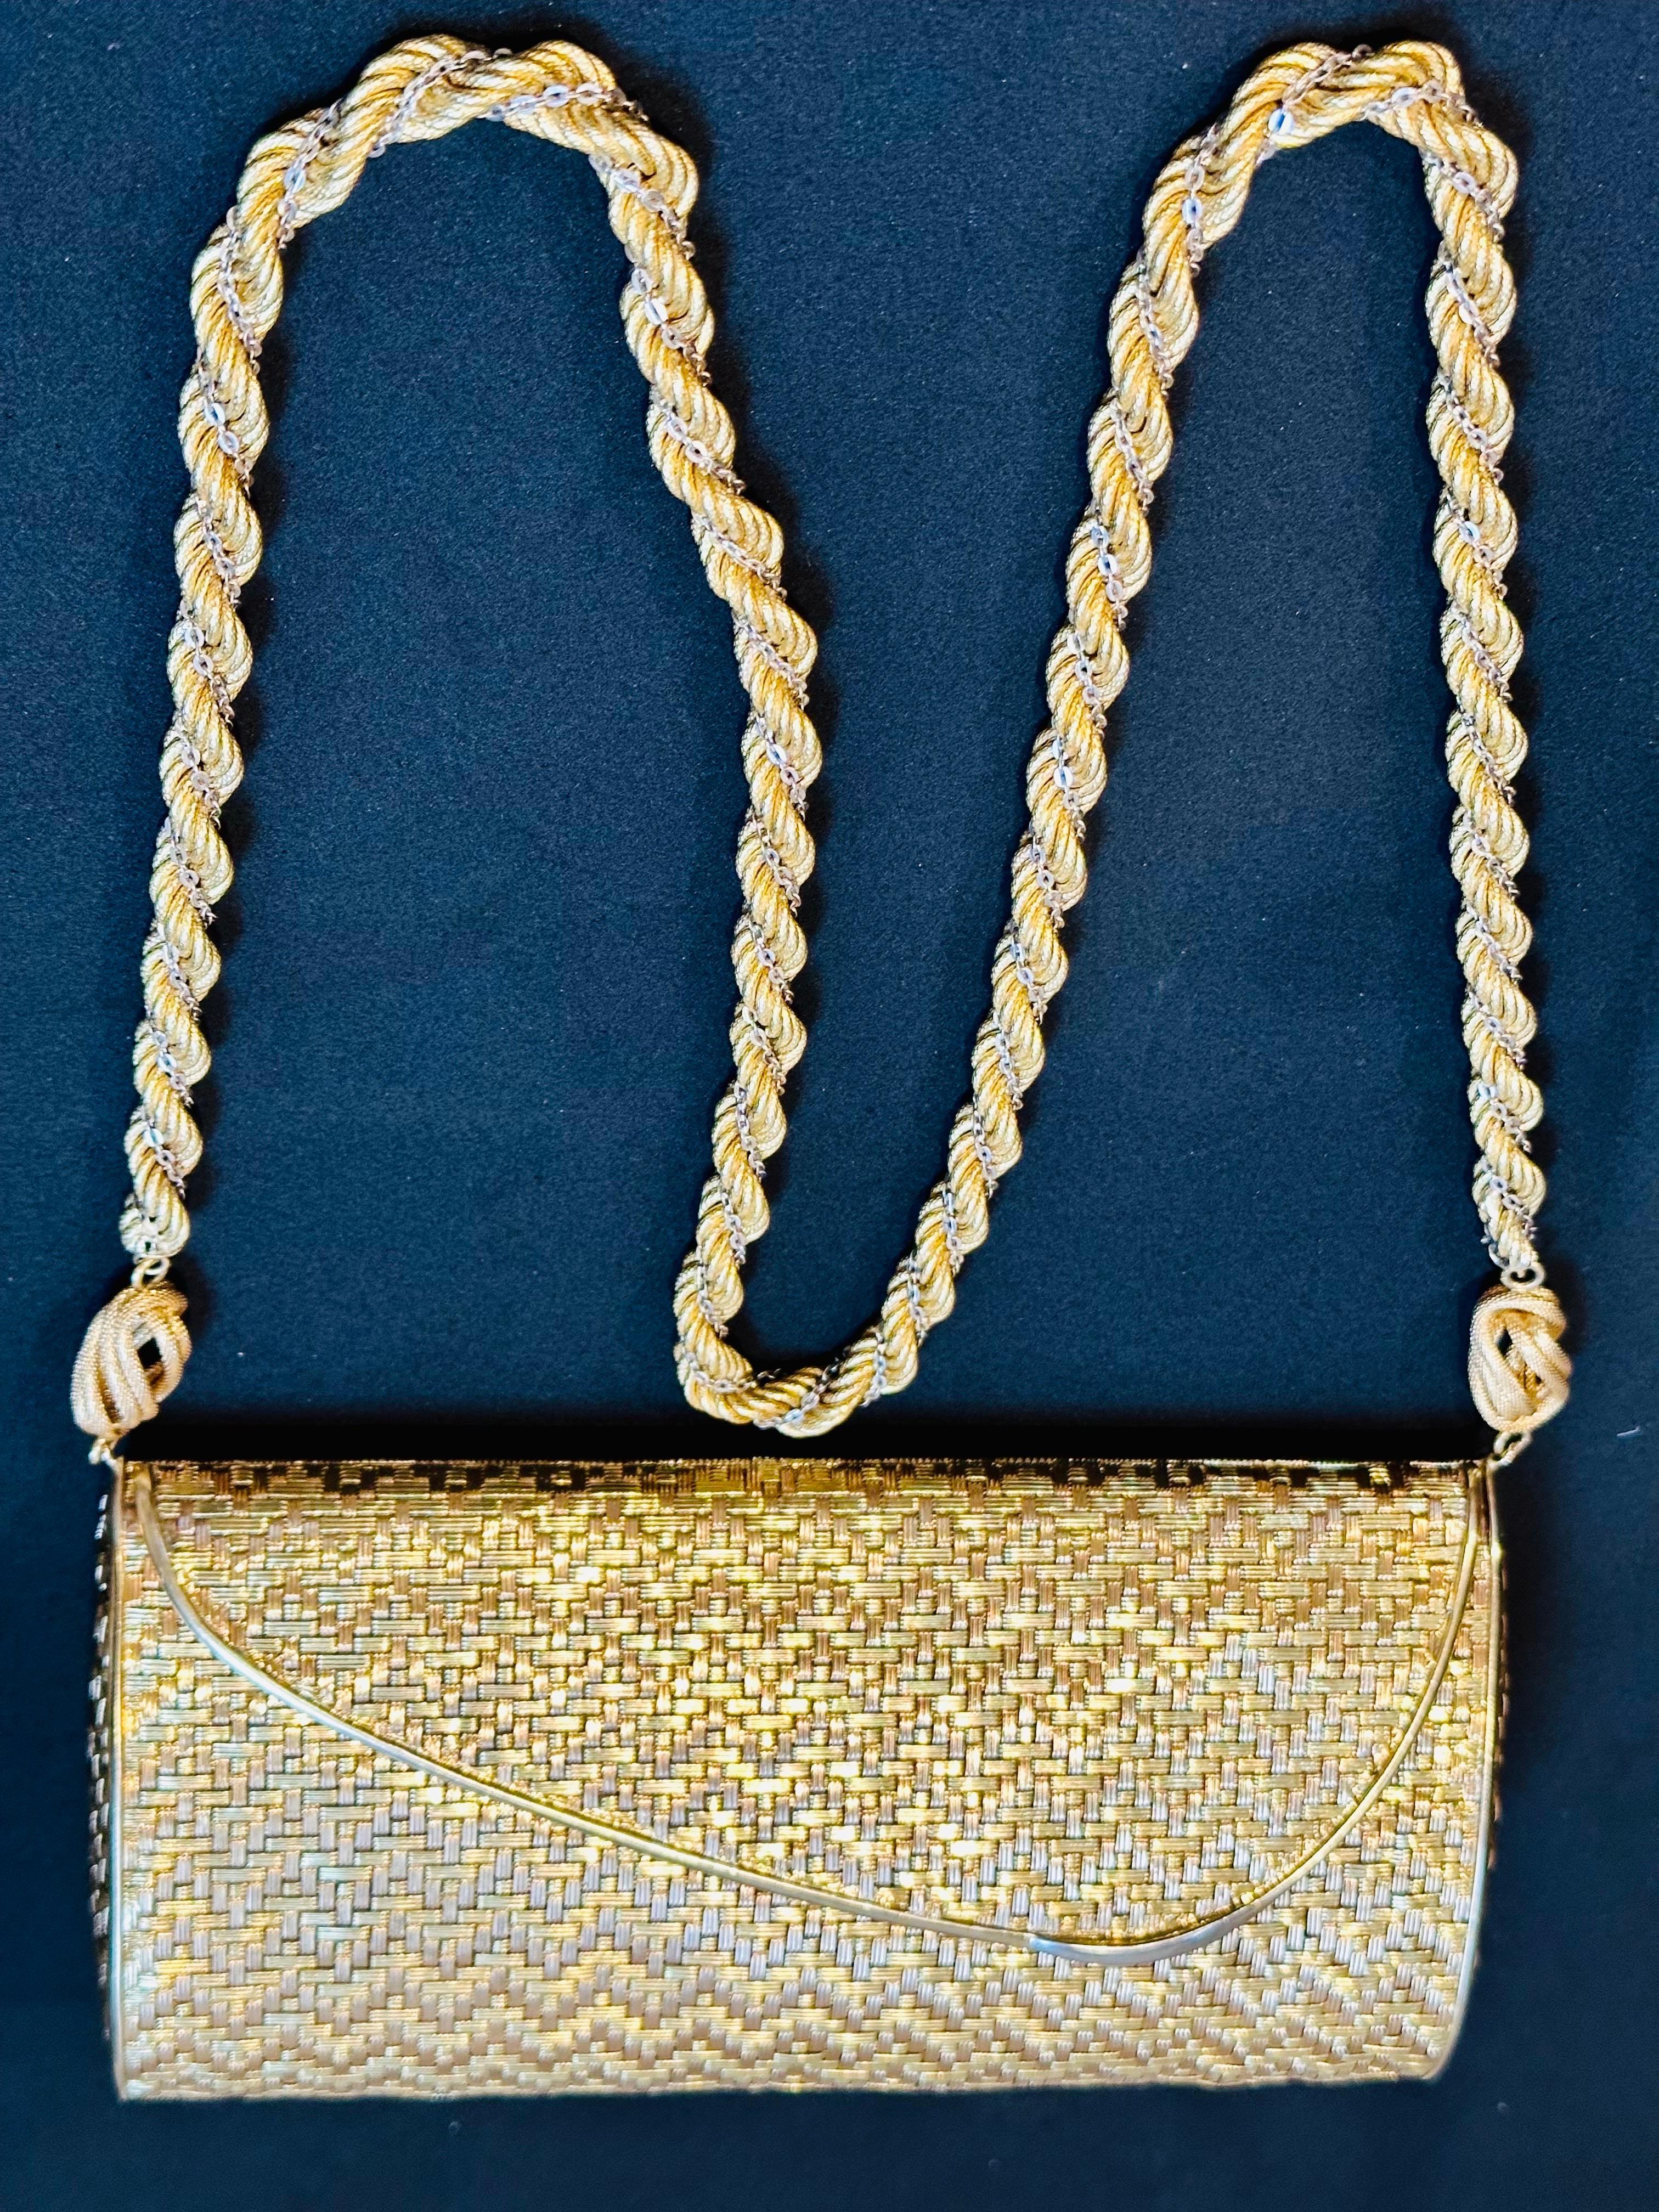 STUNNING AND RARE! 
Cartier, France 18 Karat Gold Evening Minaudière
This exquisite Vintage Clutch Purse from the 1960s was designed with a soft textured woven style,  Cartier  crafted in solid  18 Karat  yellow gold .
Meticulously crafted 18 karat